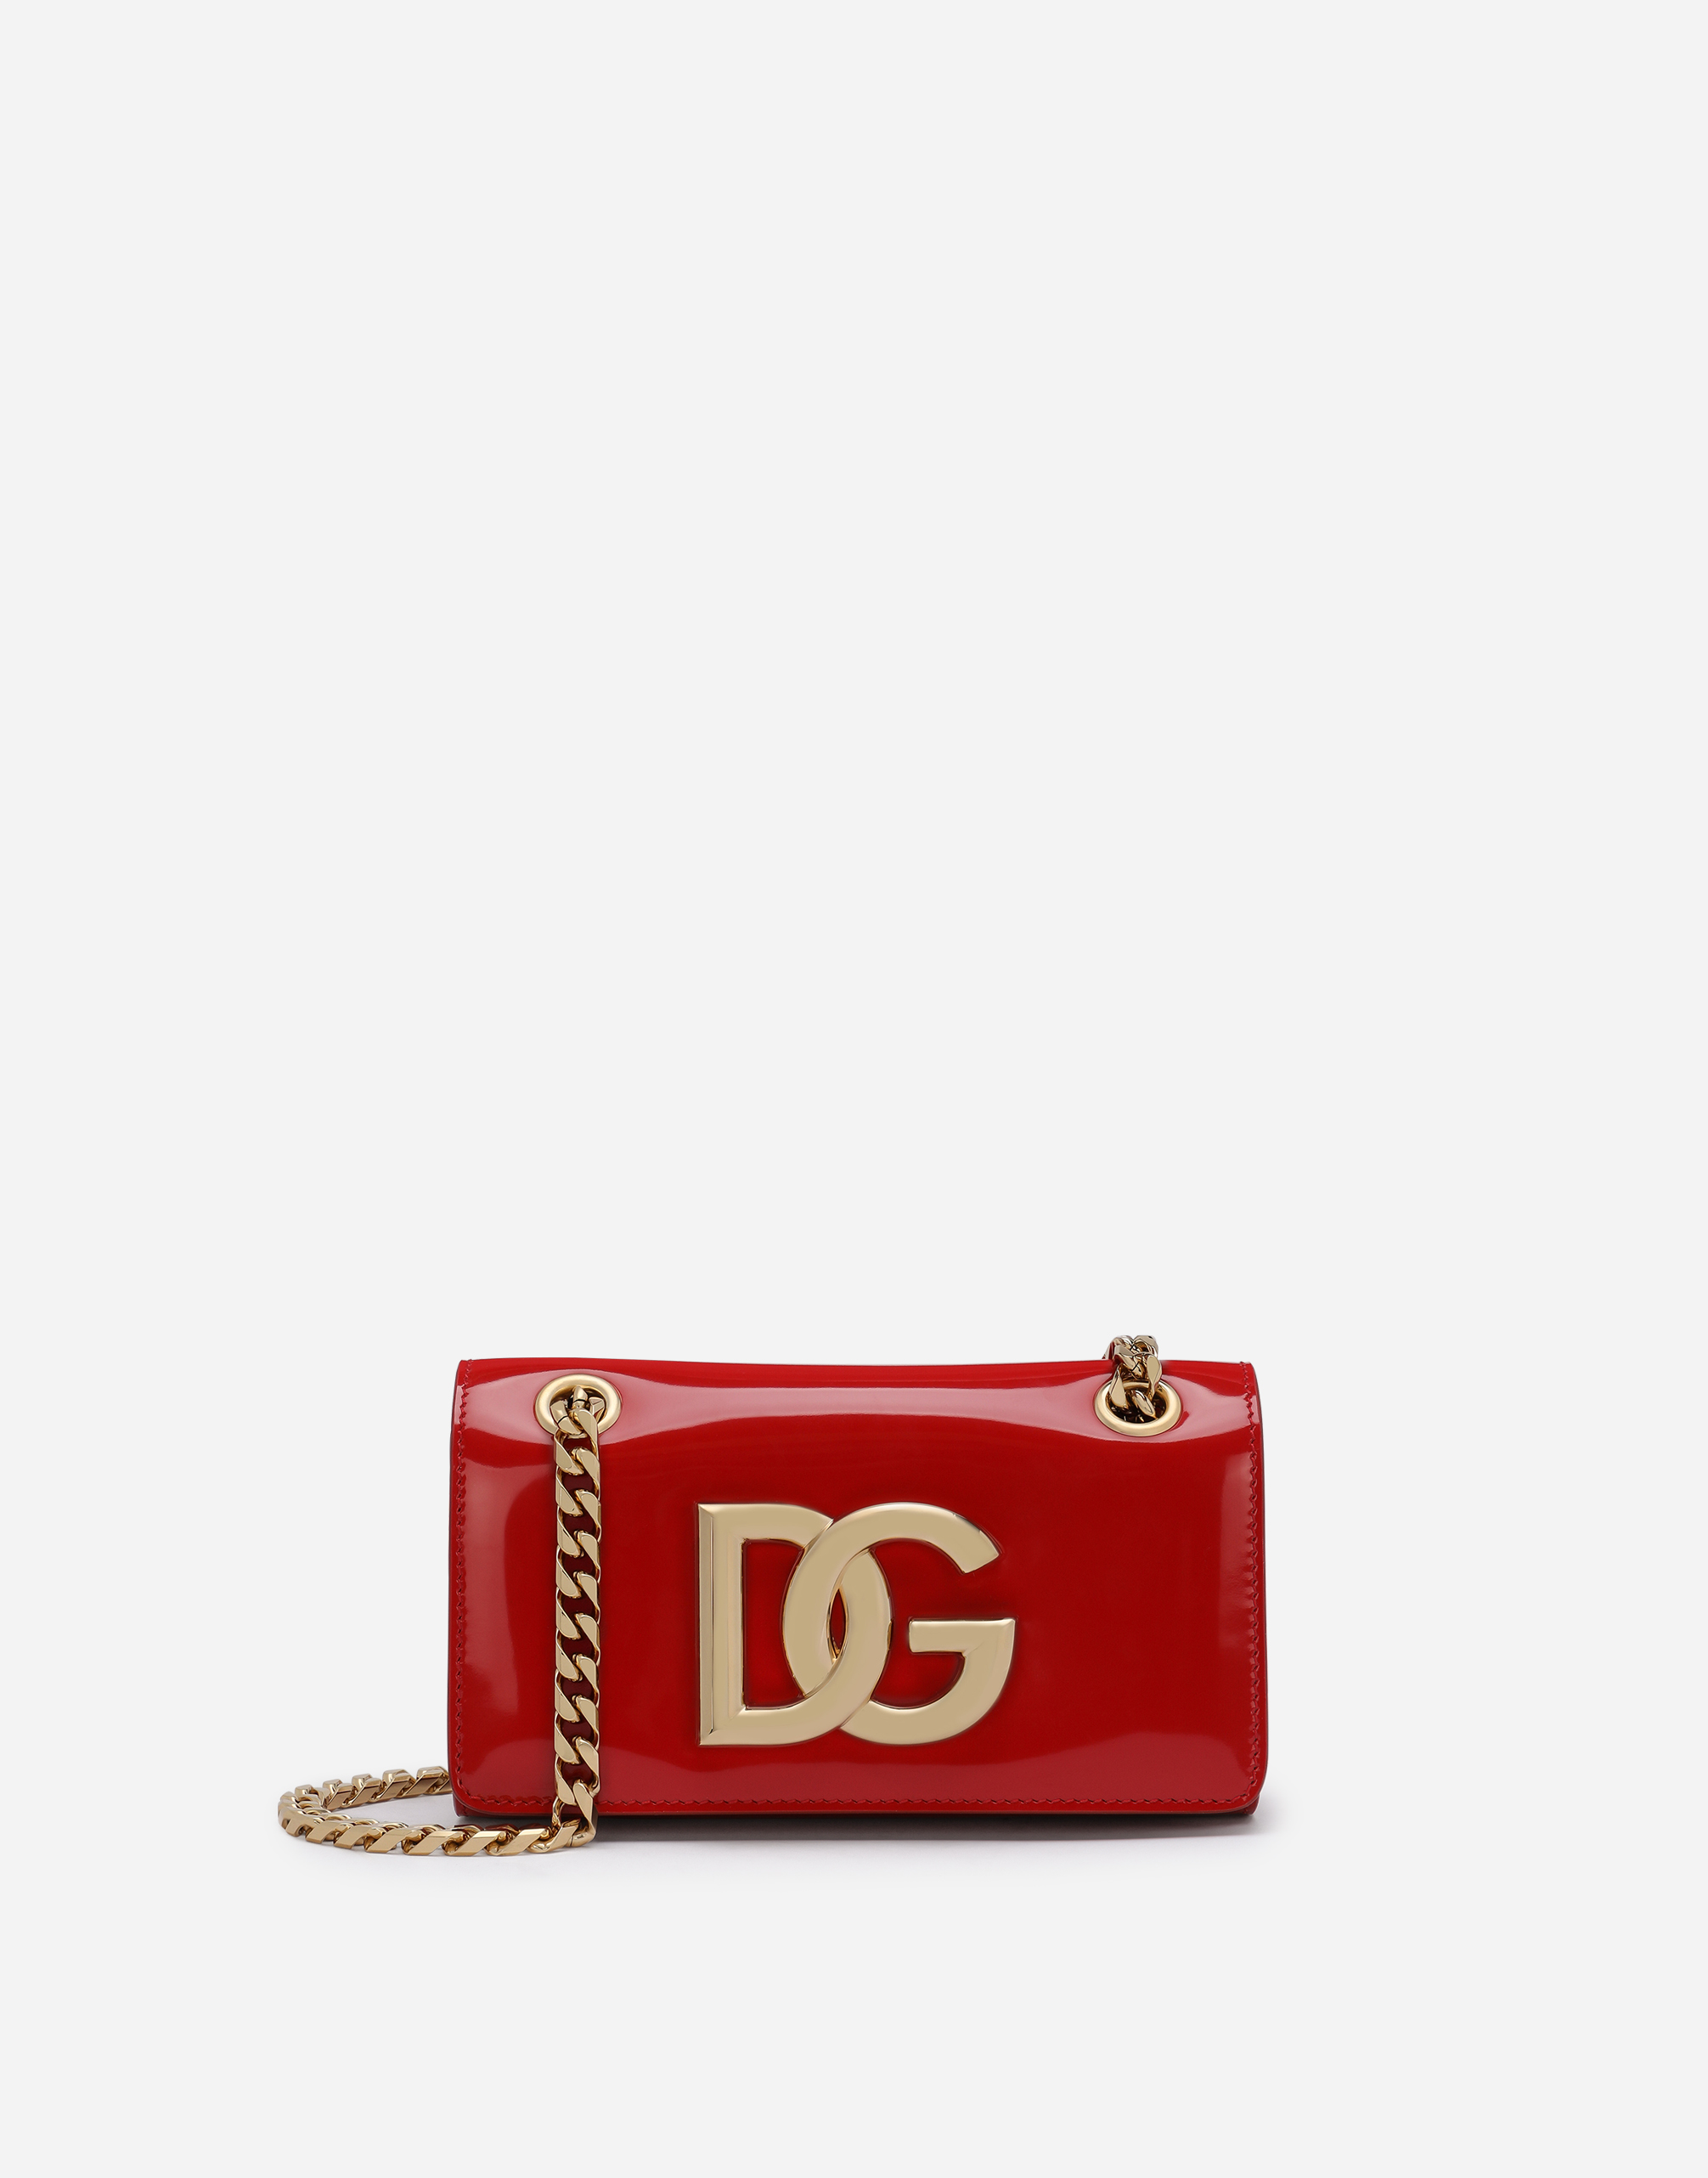 Dolce & Gabbana Polished Calfskin 3.5 Cell Phone Bag In Red